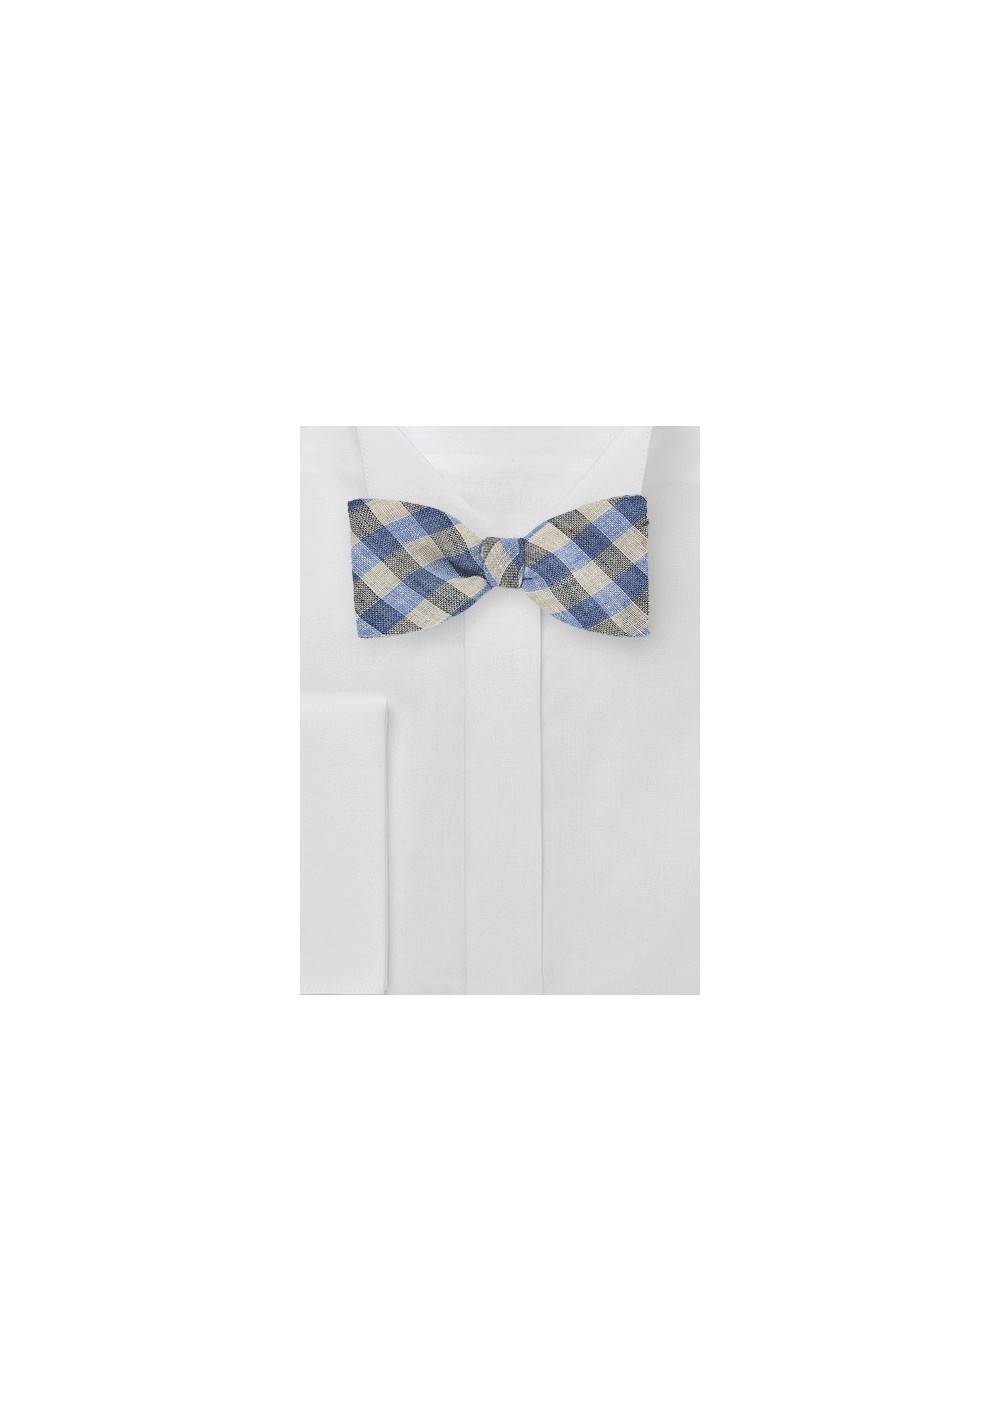 Light Blue and Tan Gingham Bow Tie